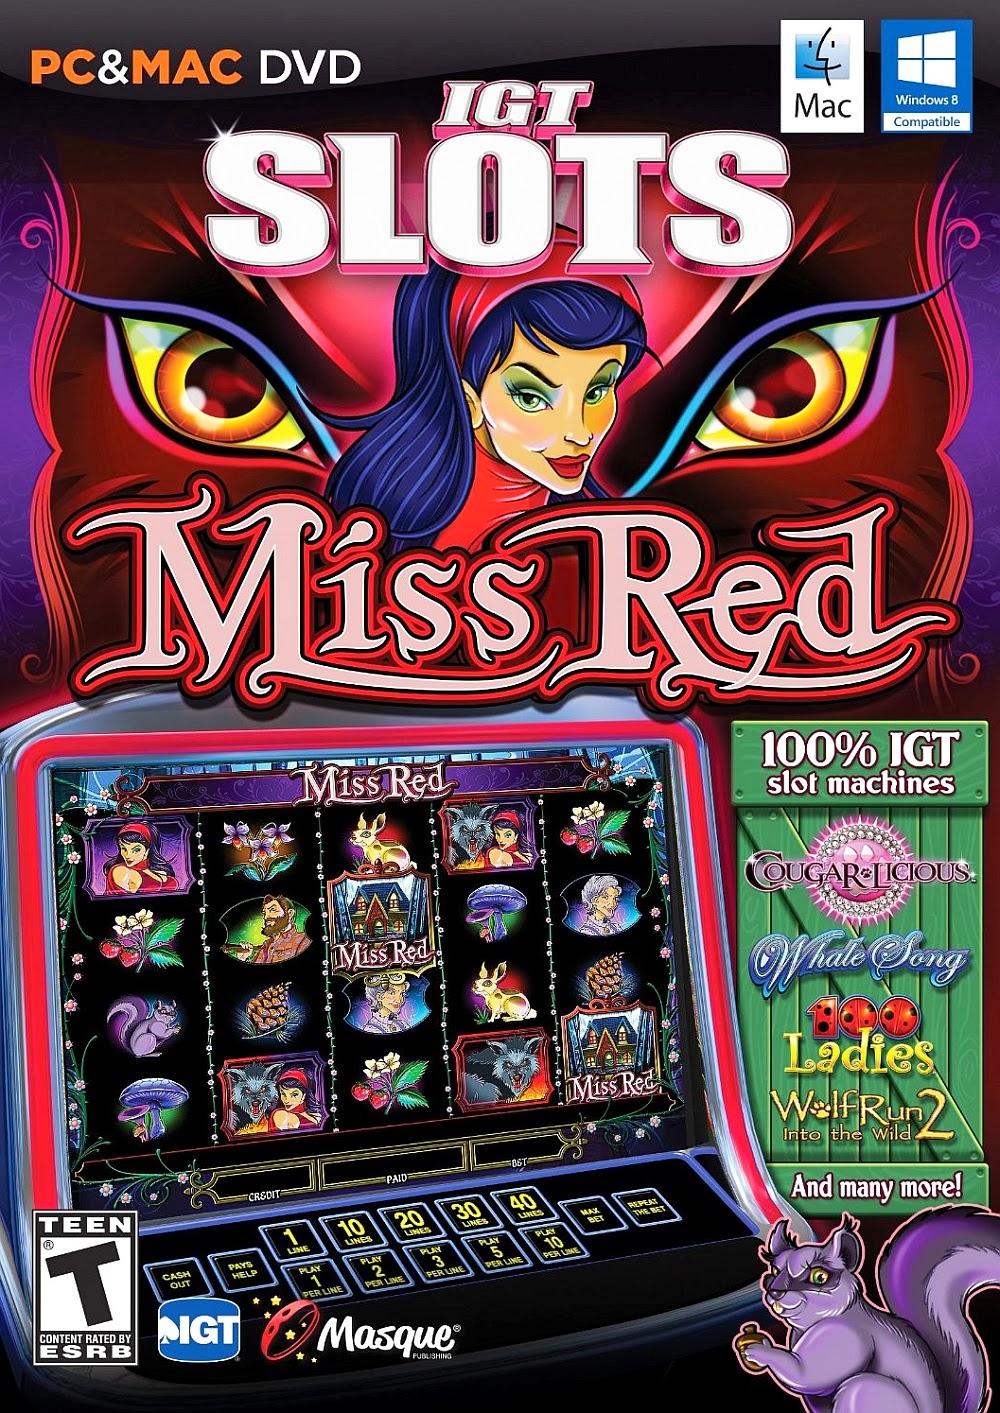 Download Free Emulator Slot Machines for Windows PC.This section contains a collection of the most popular slot machines from well-known game software manufacturers such as Novomatic Multi-Gaminator, Igrosoft, Mega Jack, Belatra, Duomatic, etc.